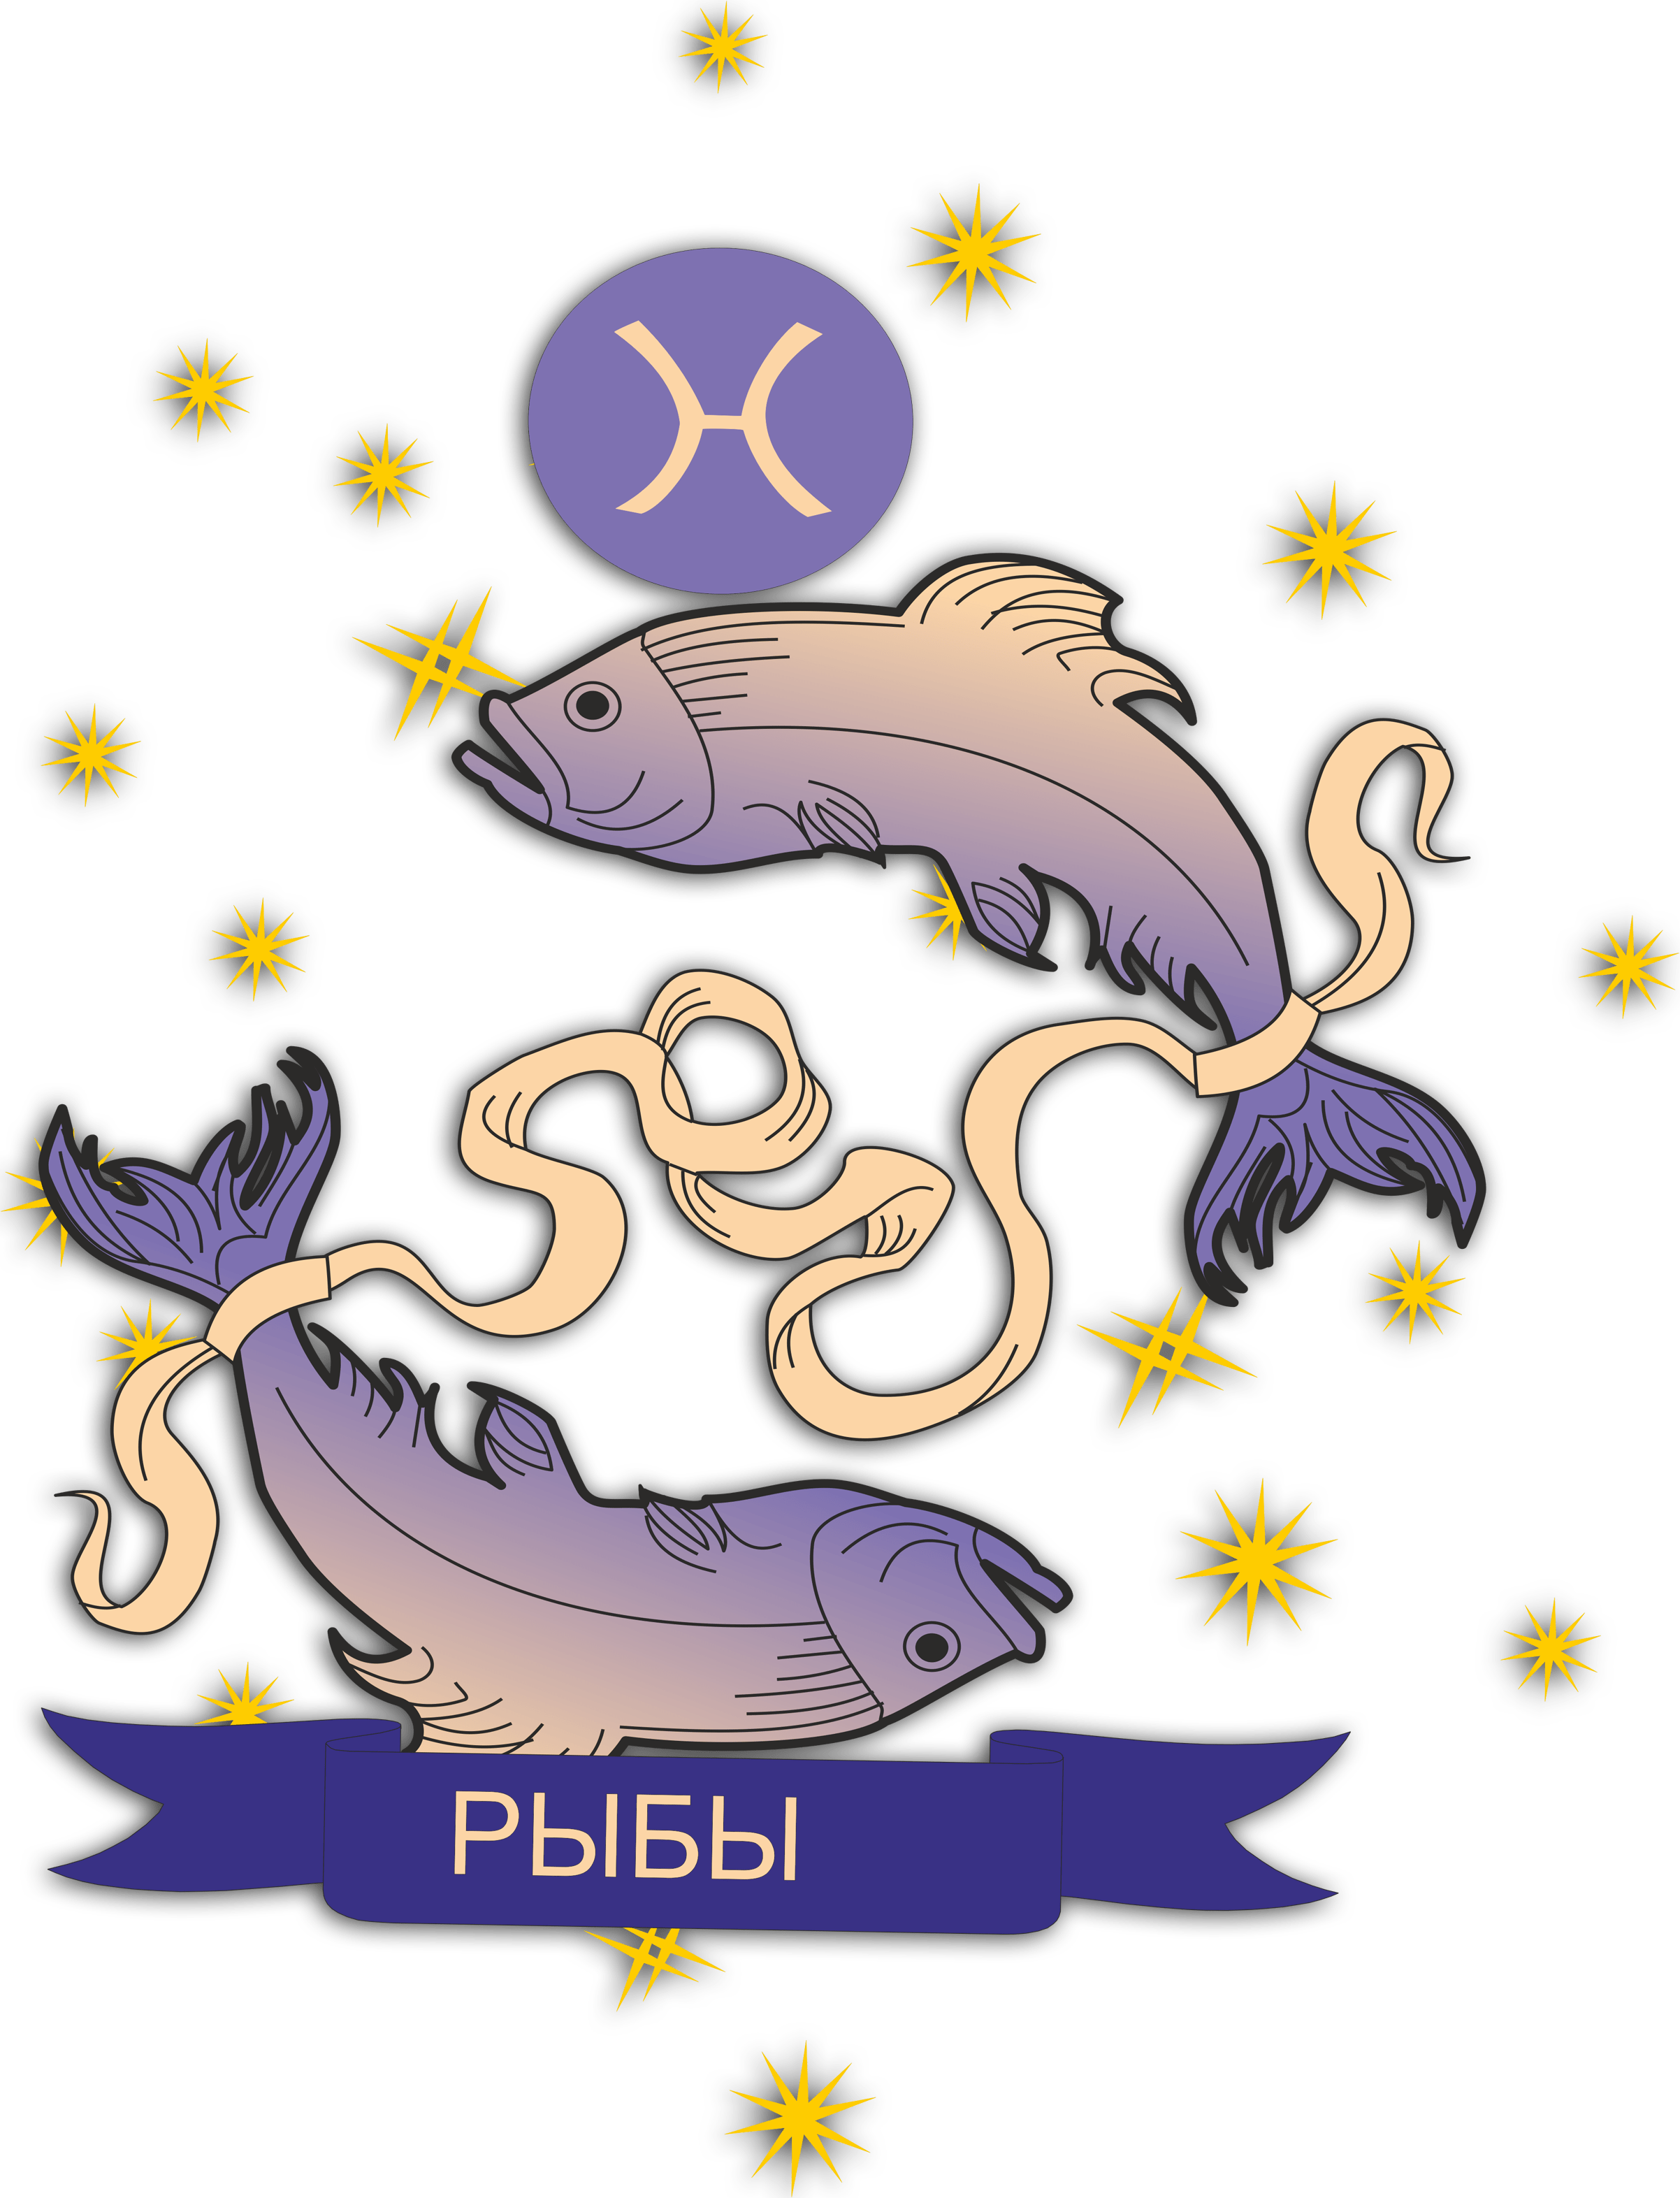 Pisces PNG image free Download 